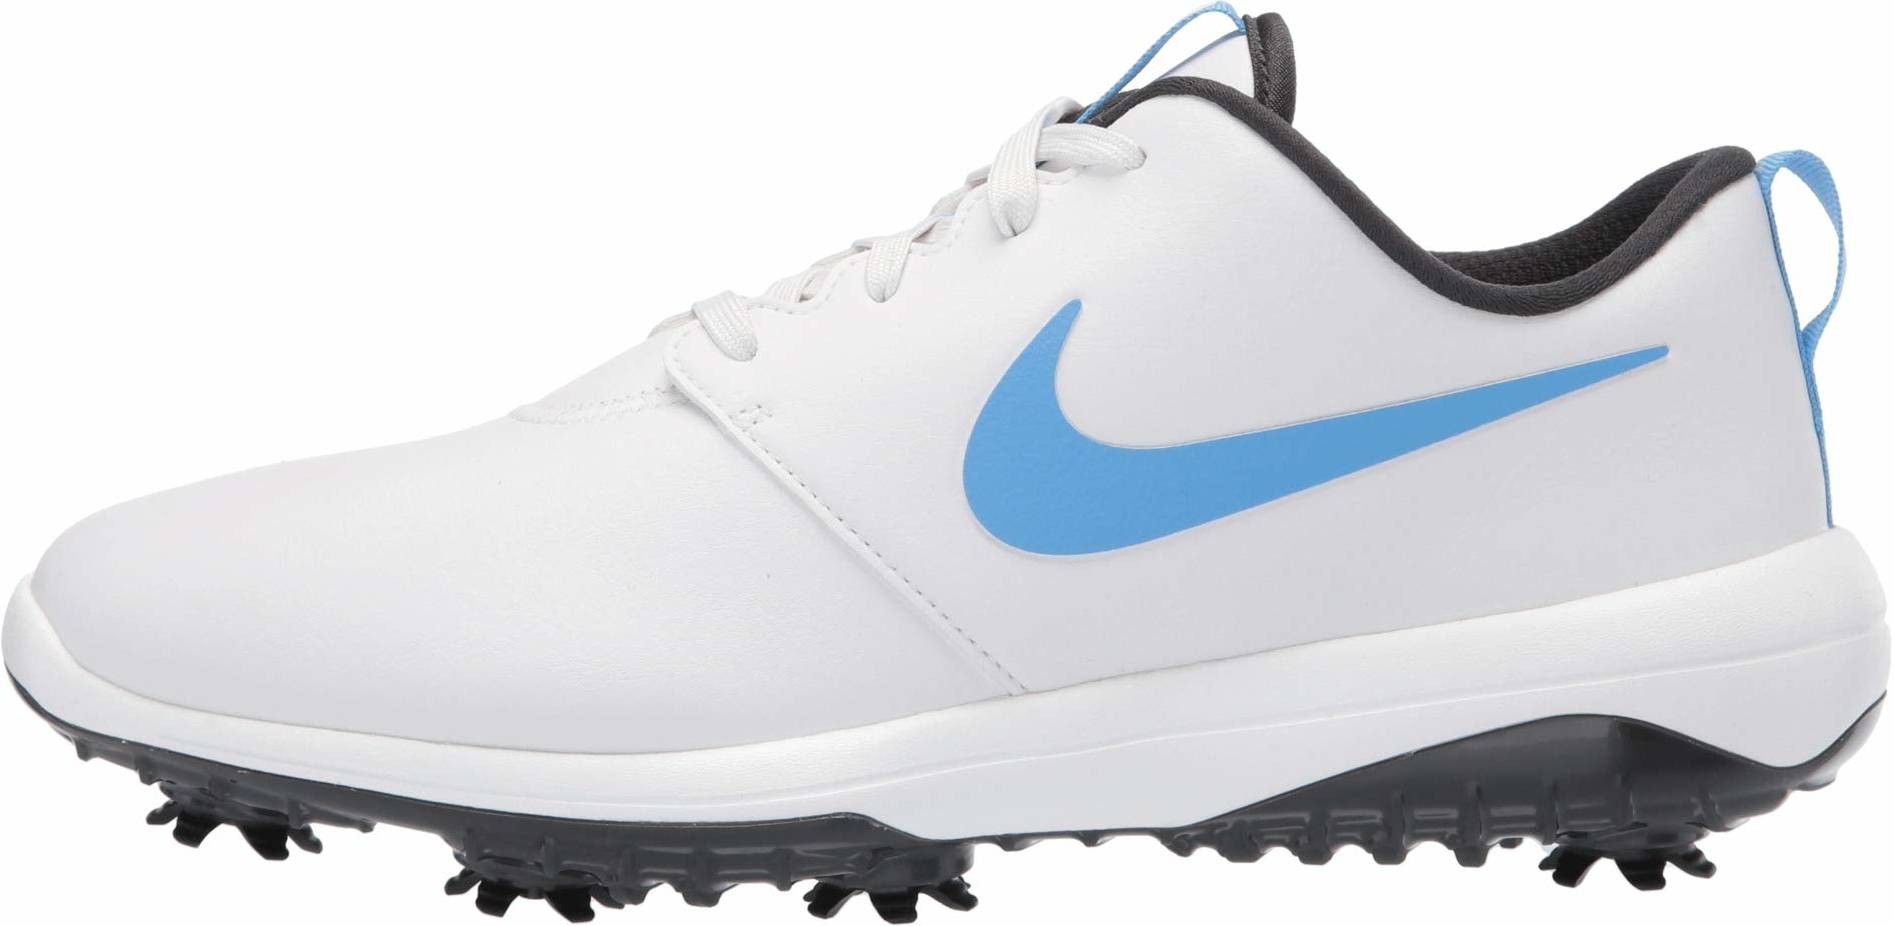 nike golf shoes size 9